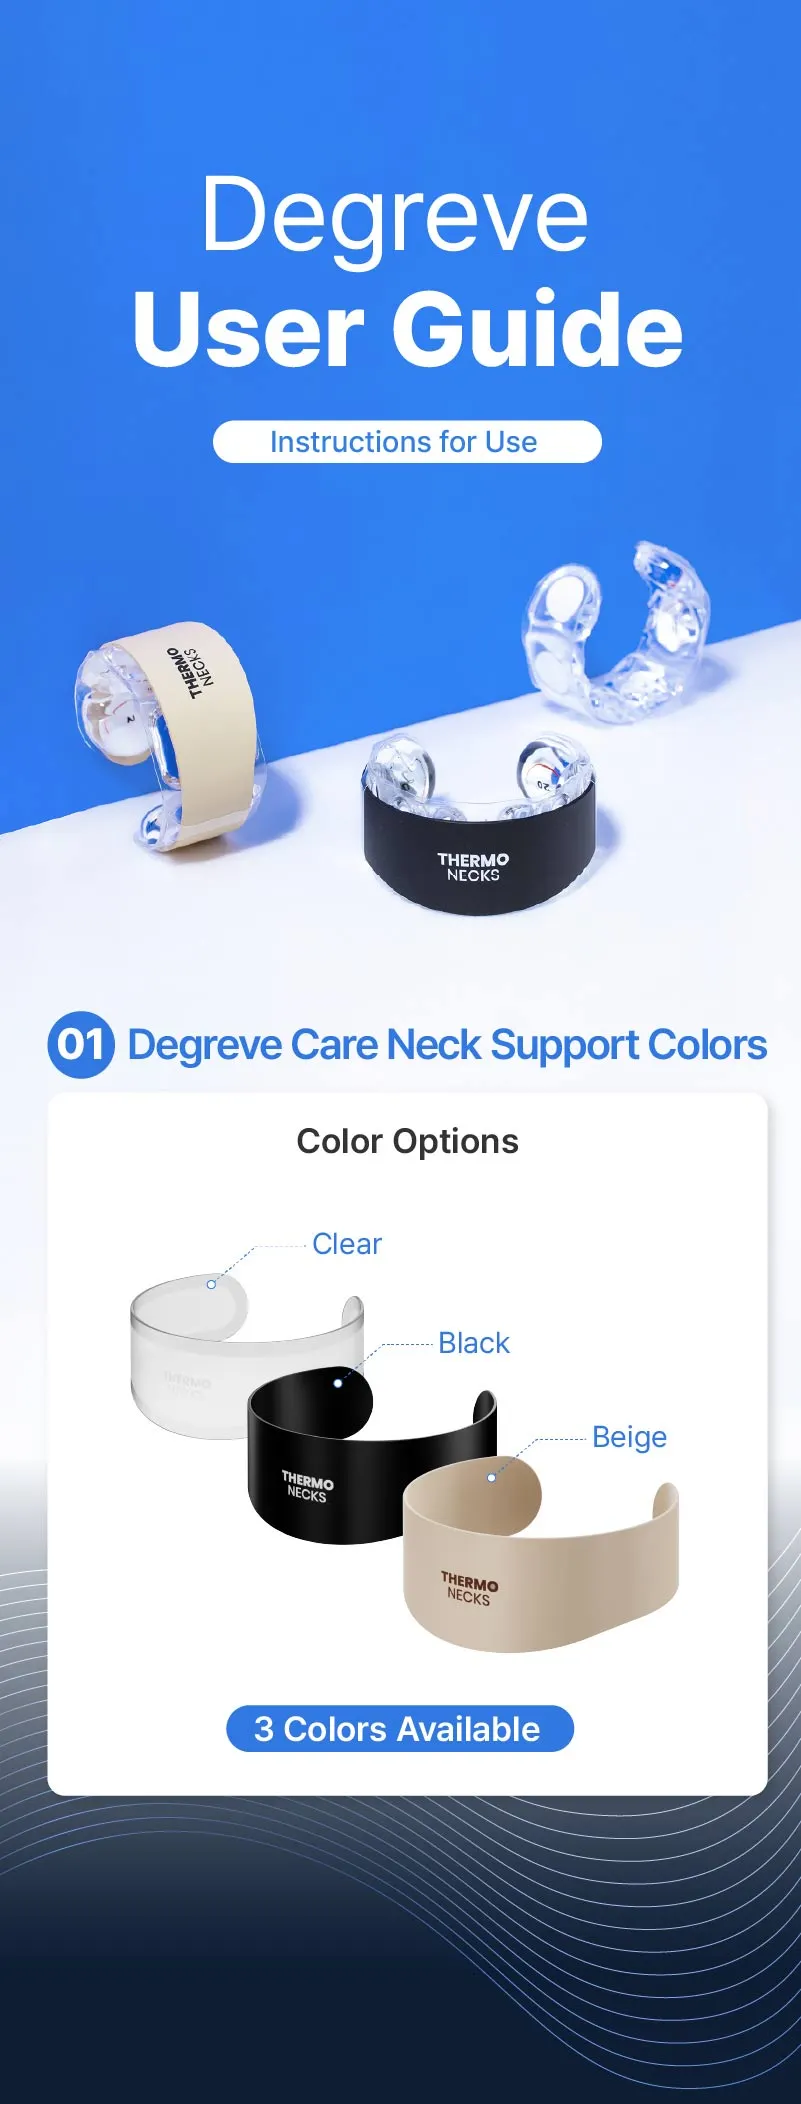 THERMONECKS: 8 Hour Neck Cooler with No Cold Pain by DEGREVE INC —  Kickstarter